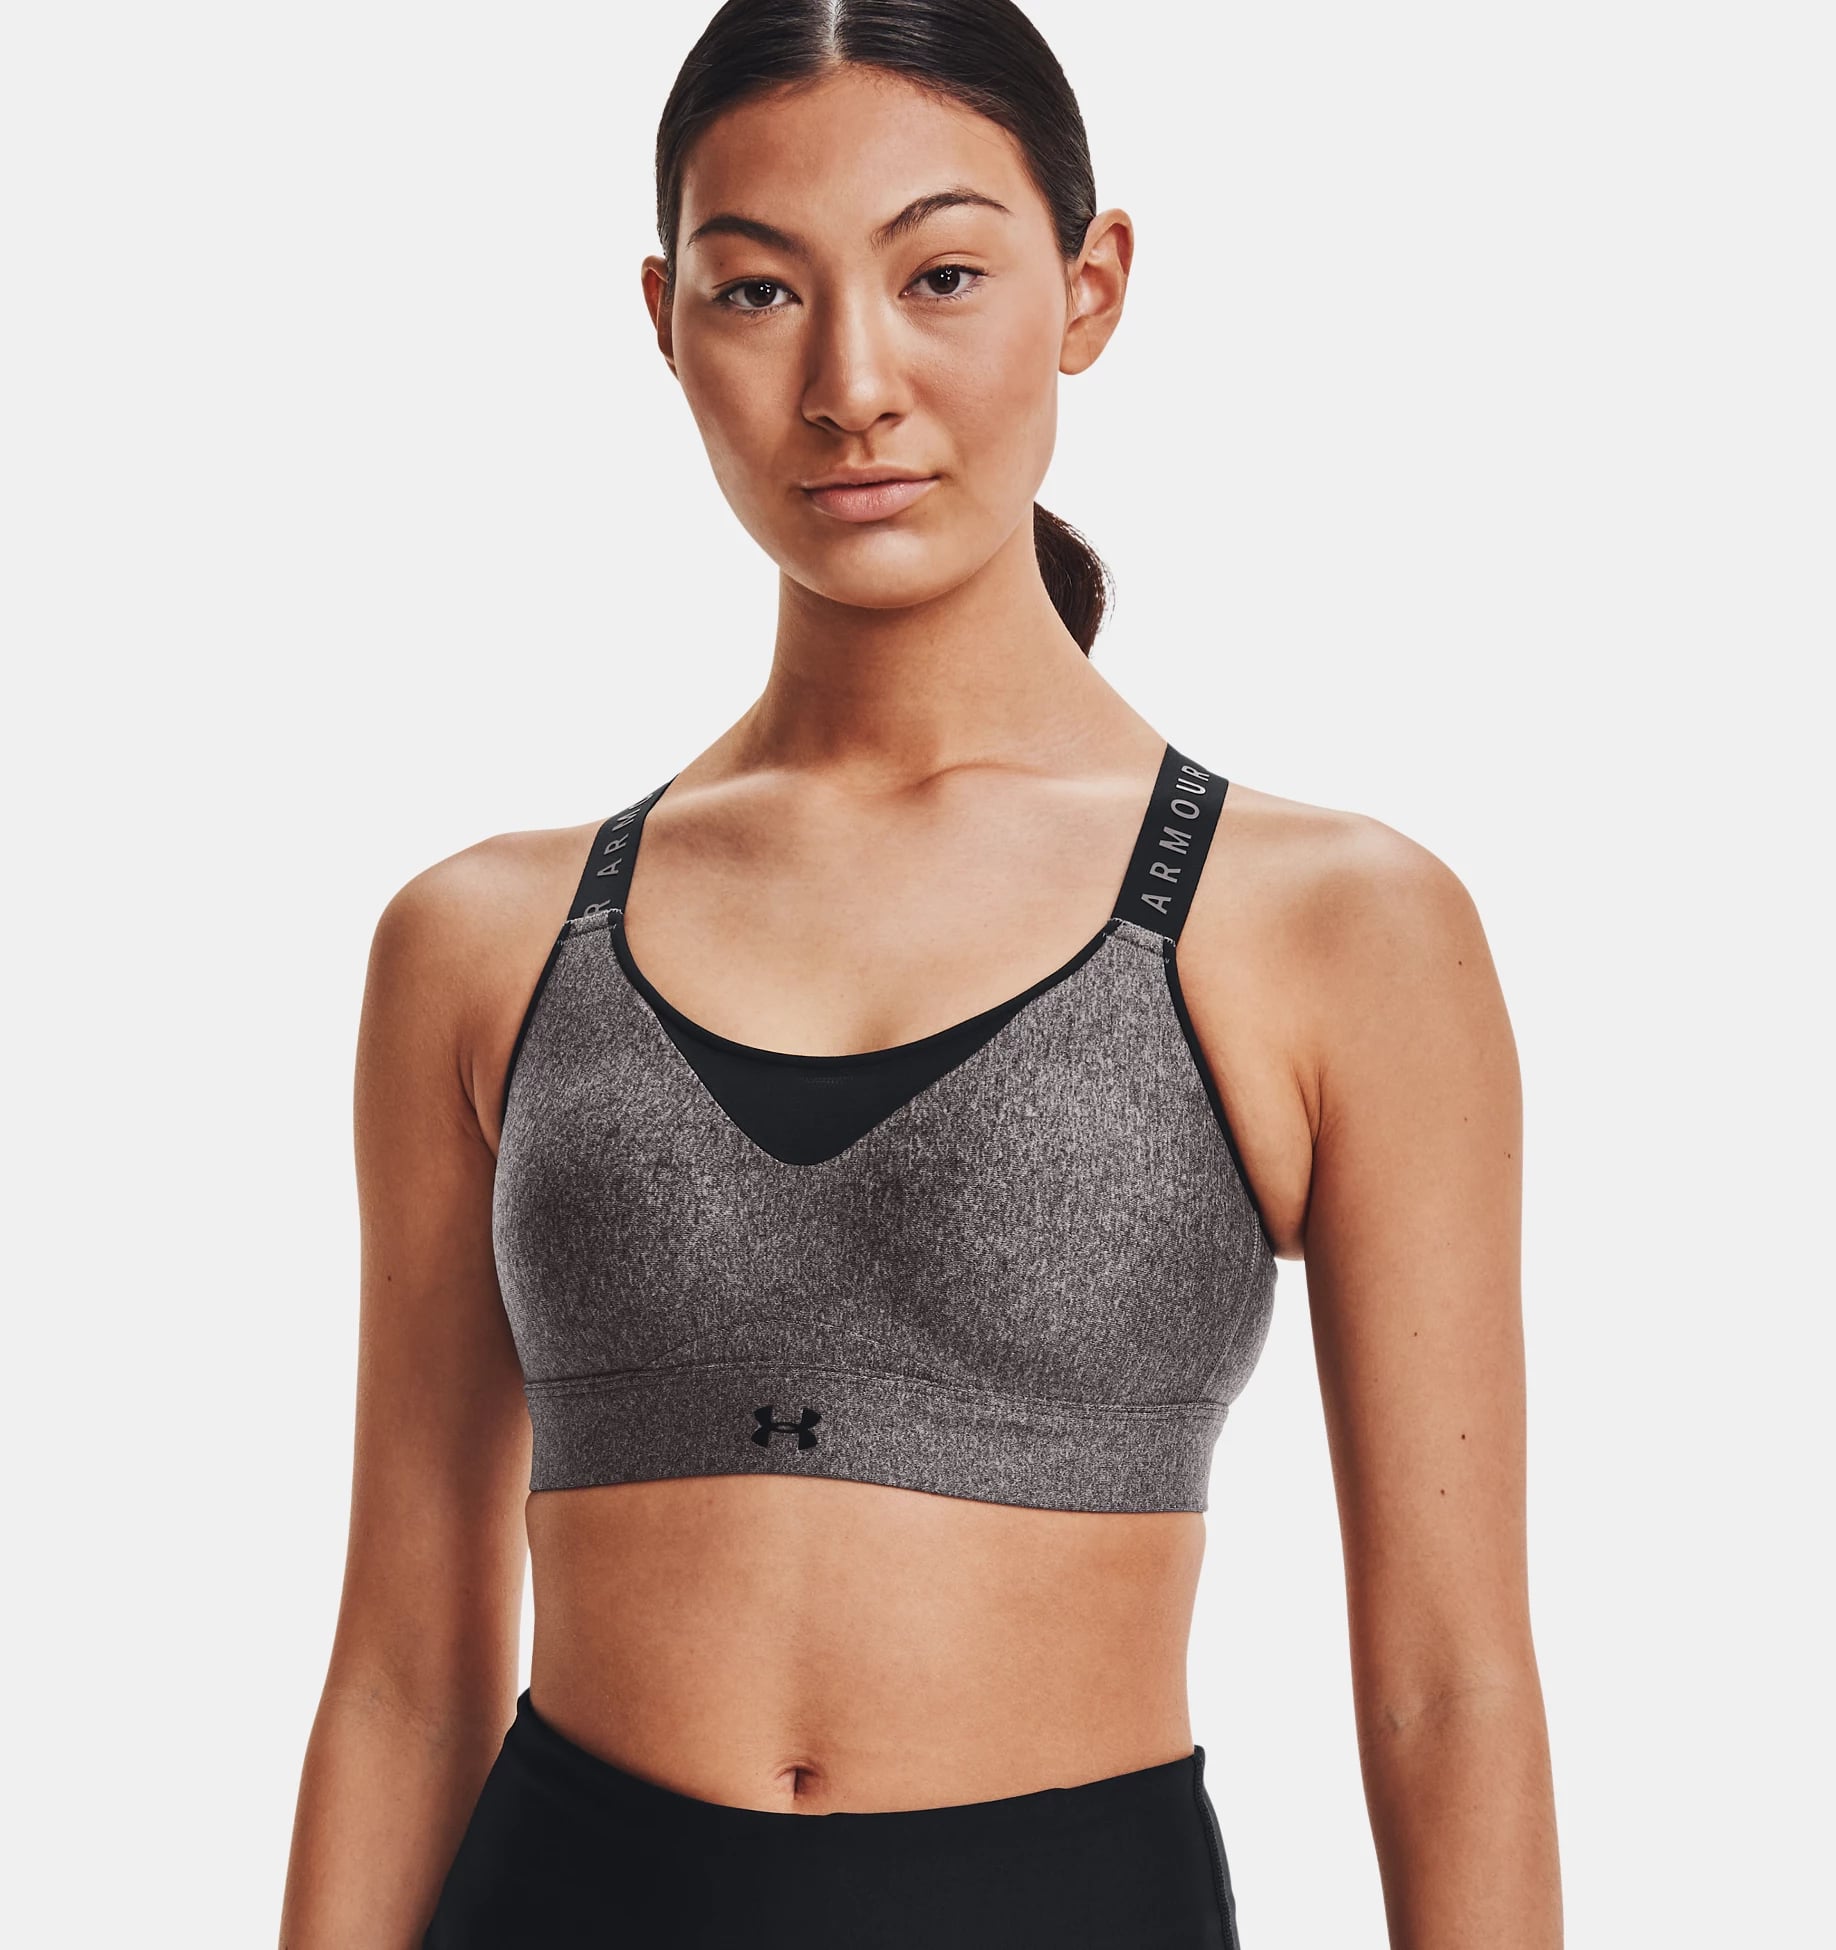 The Best Under Armour Sports Bras As Told By A Pro Runner